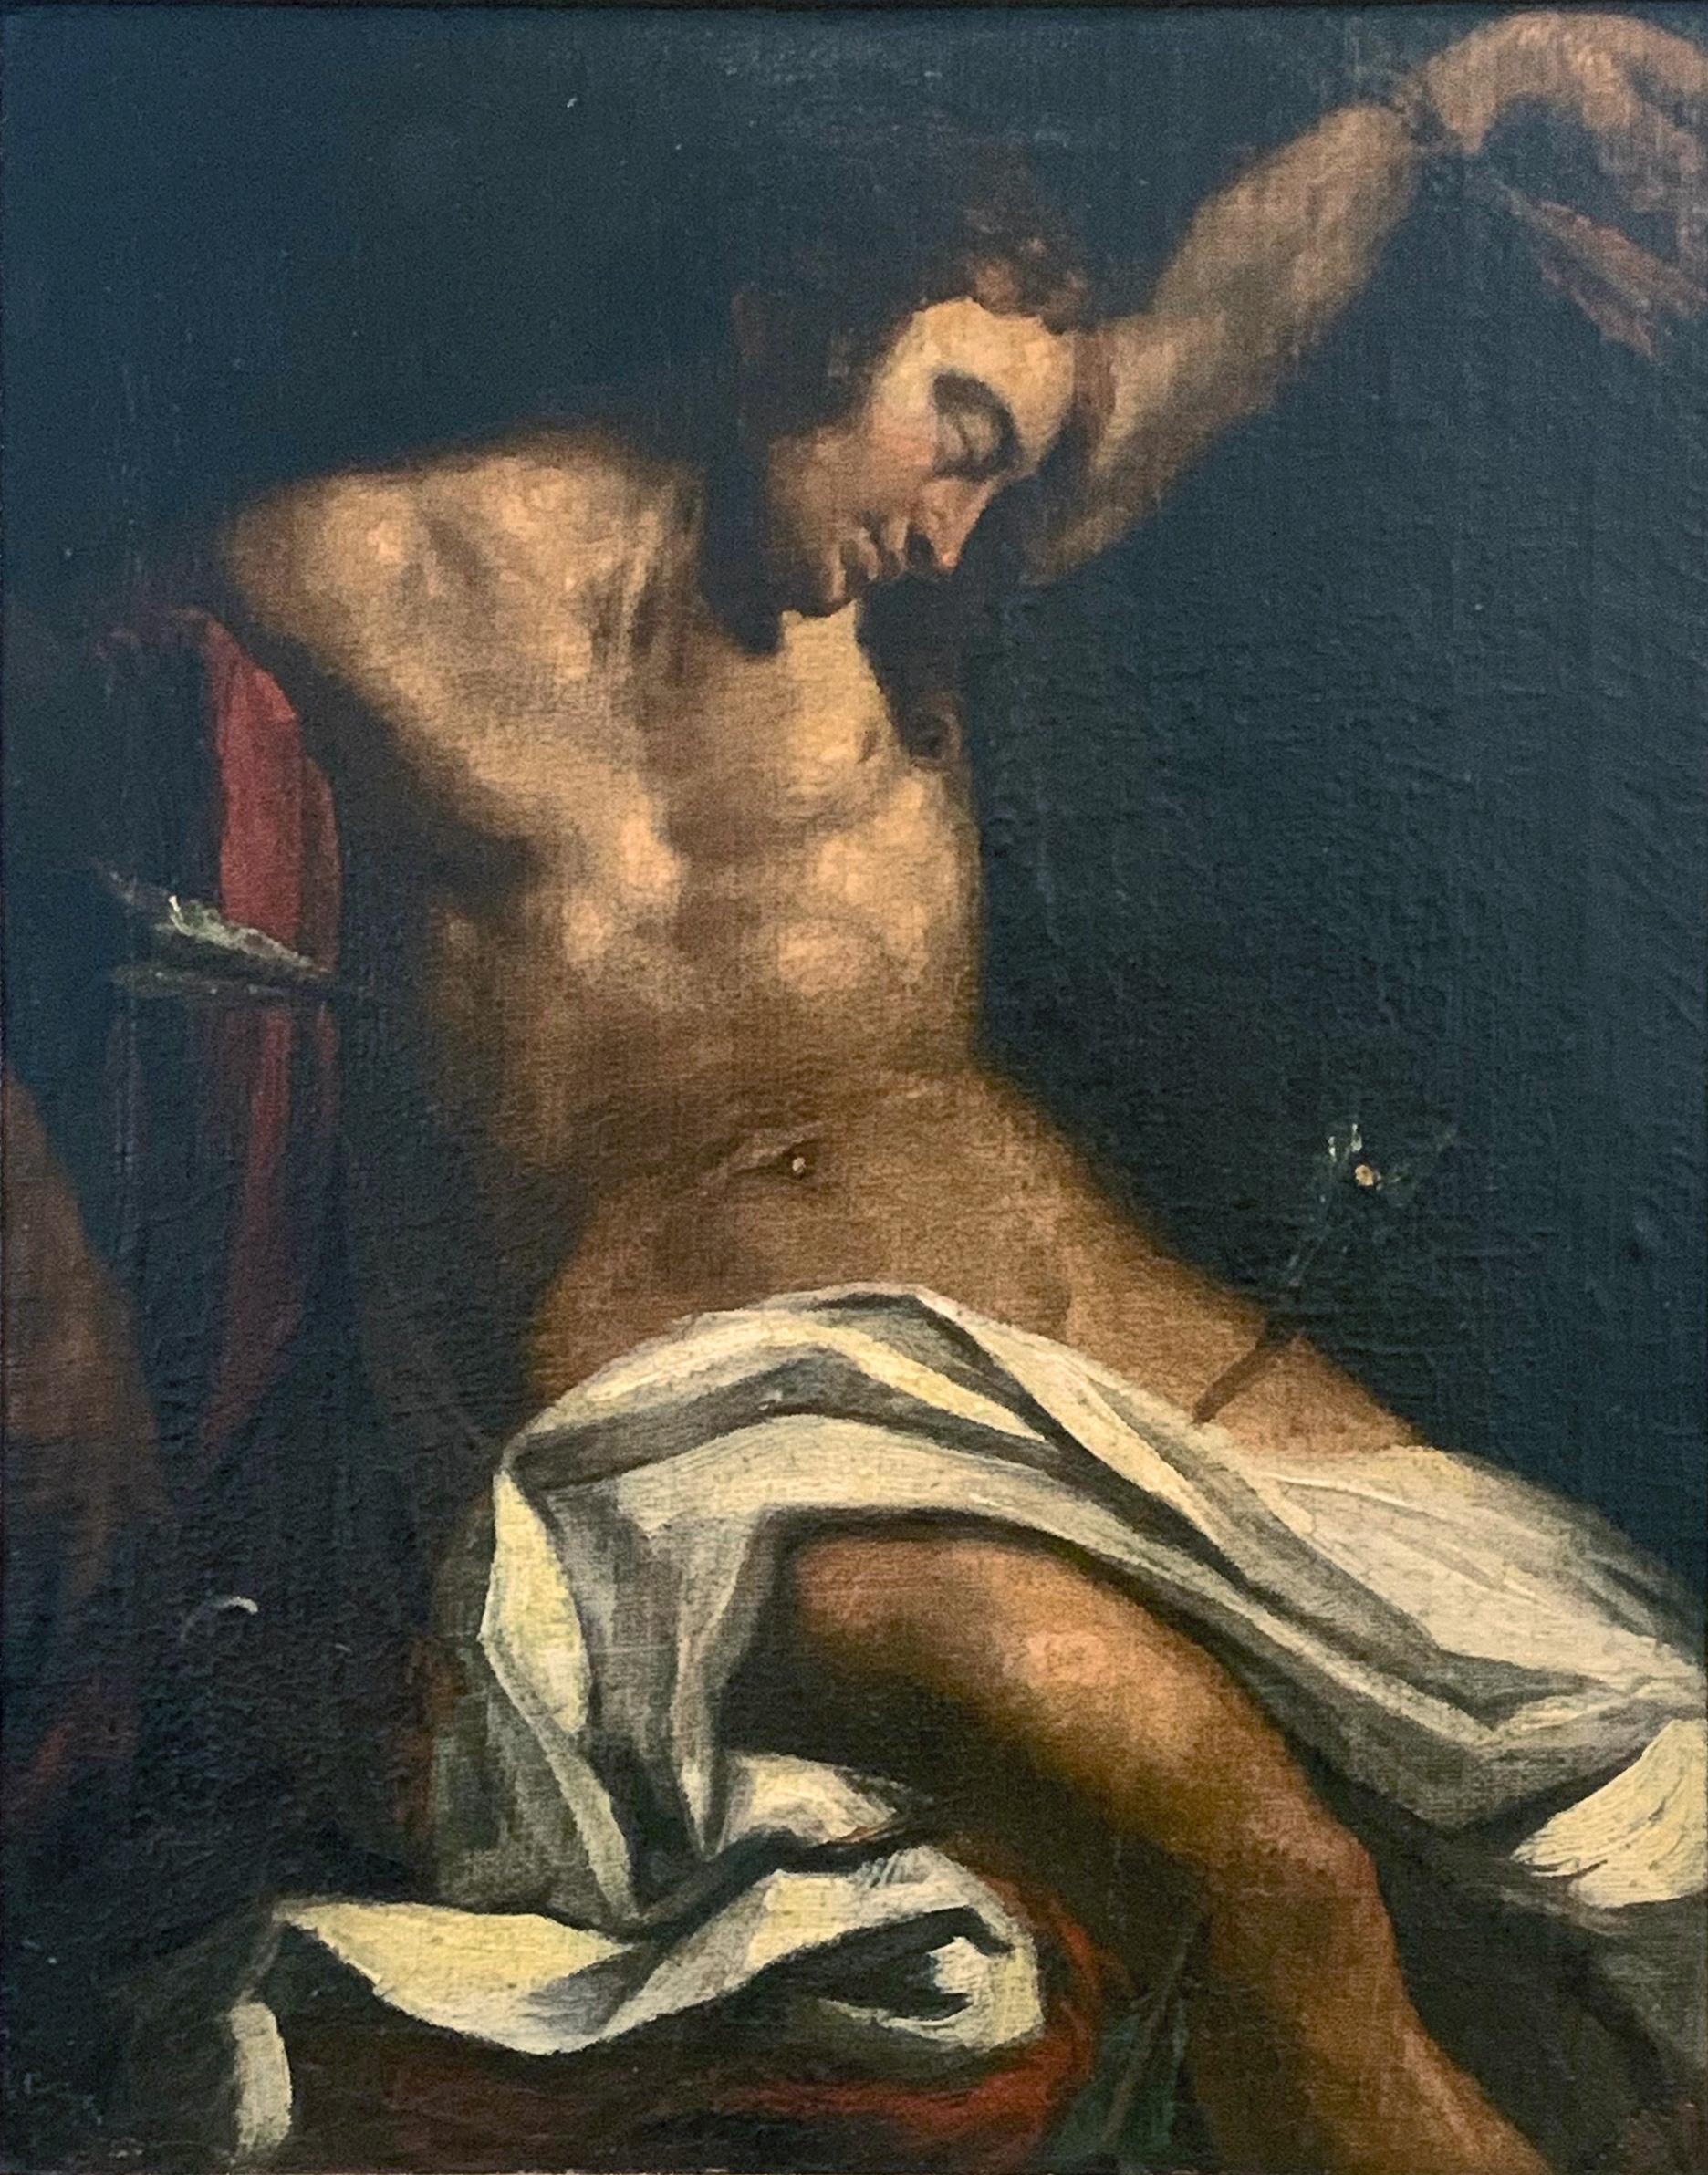 Quiet and at peace, with almost a smile on his face, the expired Saint Sebastian depicted here -- in the nude, as is customary, and wounded with multiple arrows -- probably dates to the early to mid-19th century, given the subject's hair and facial